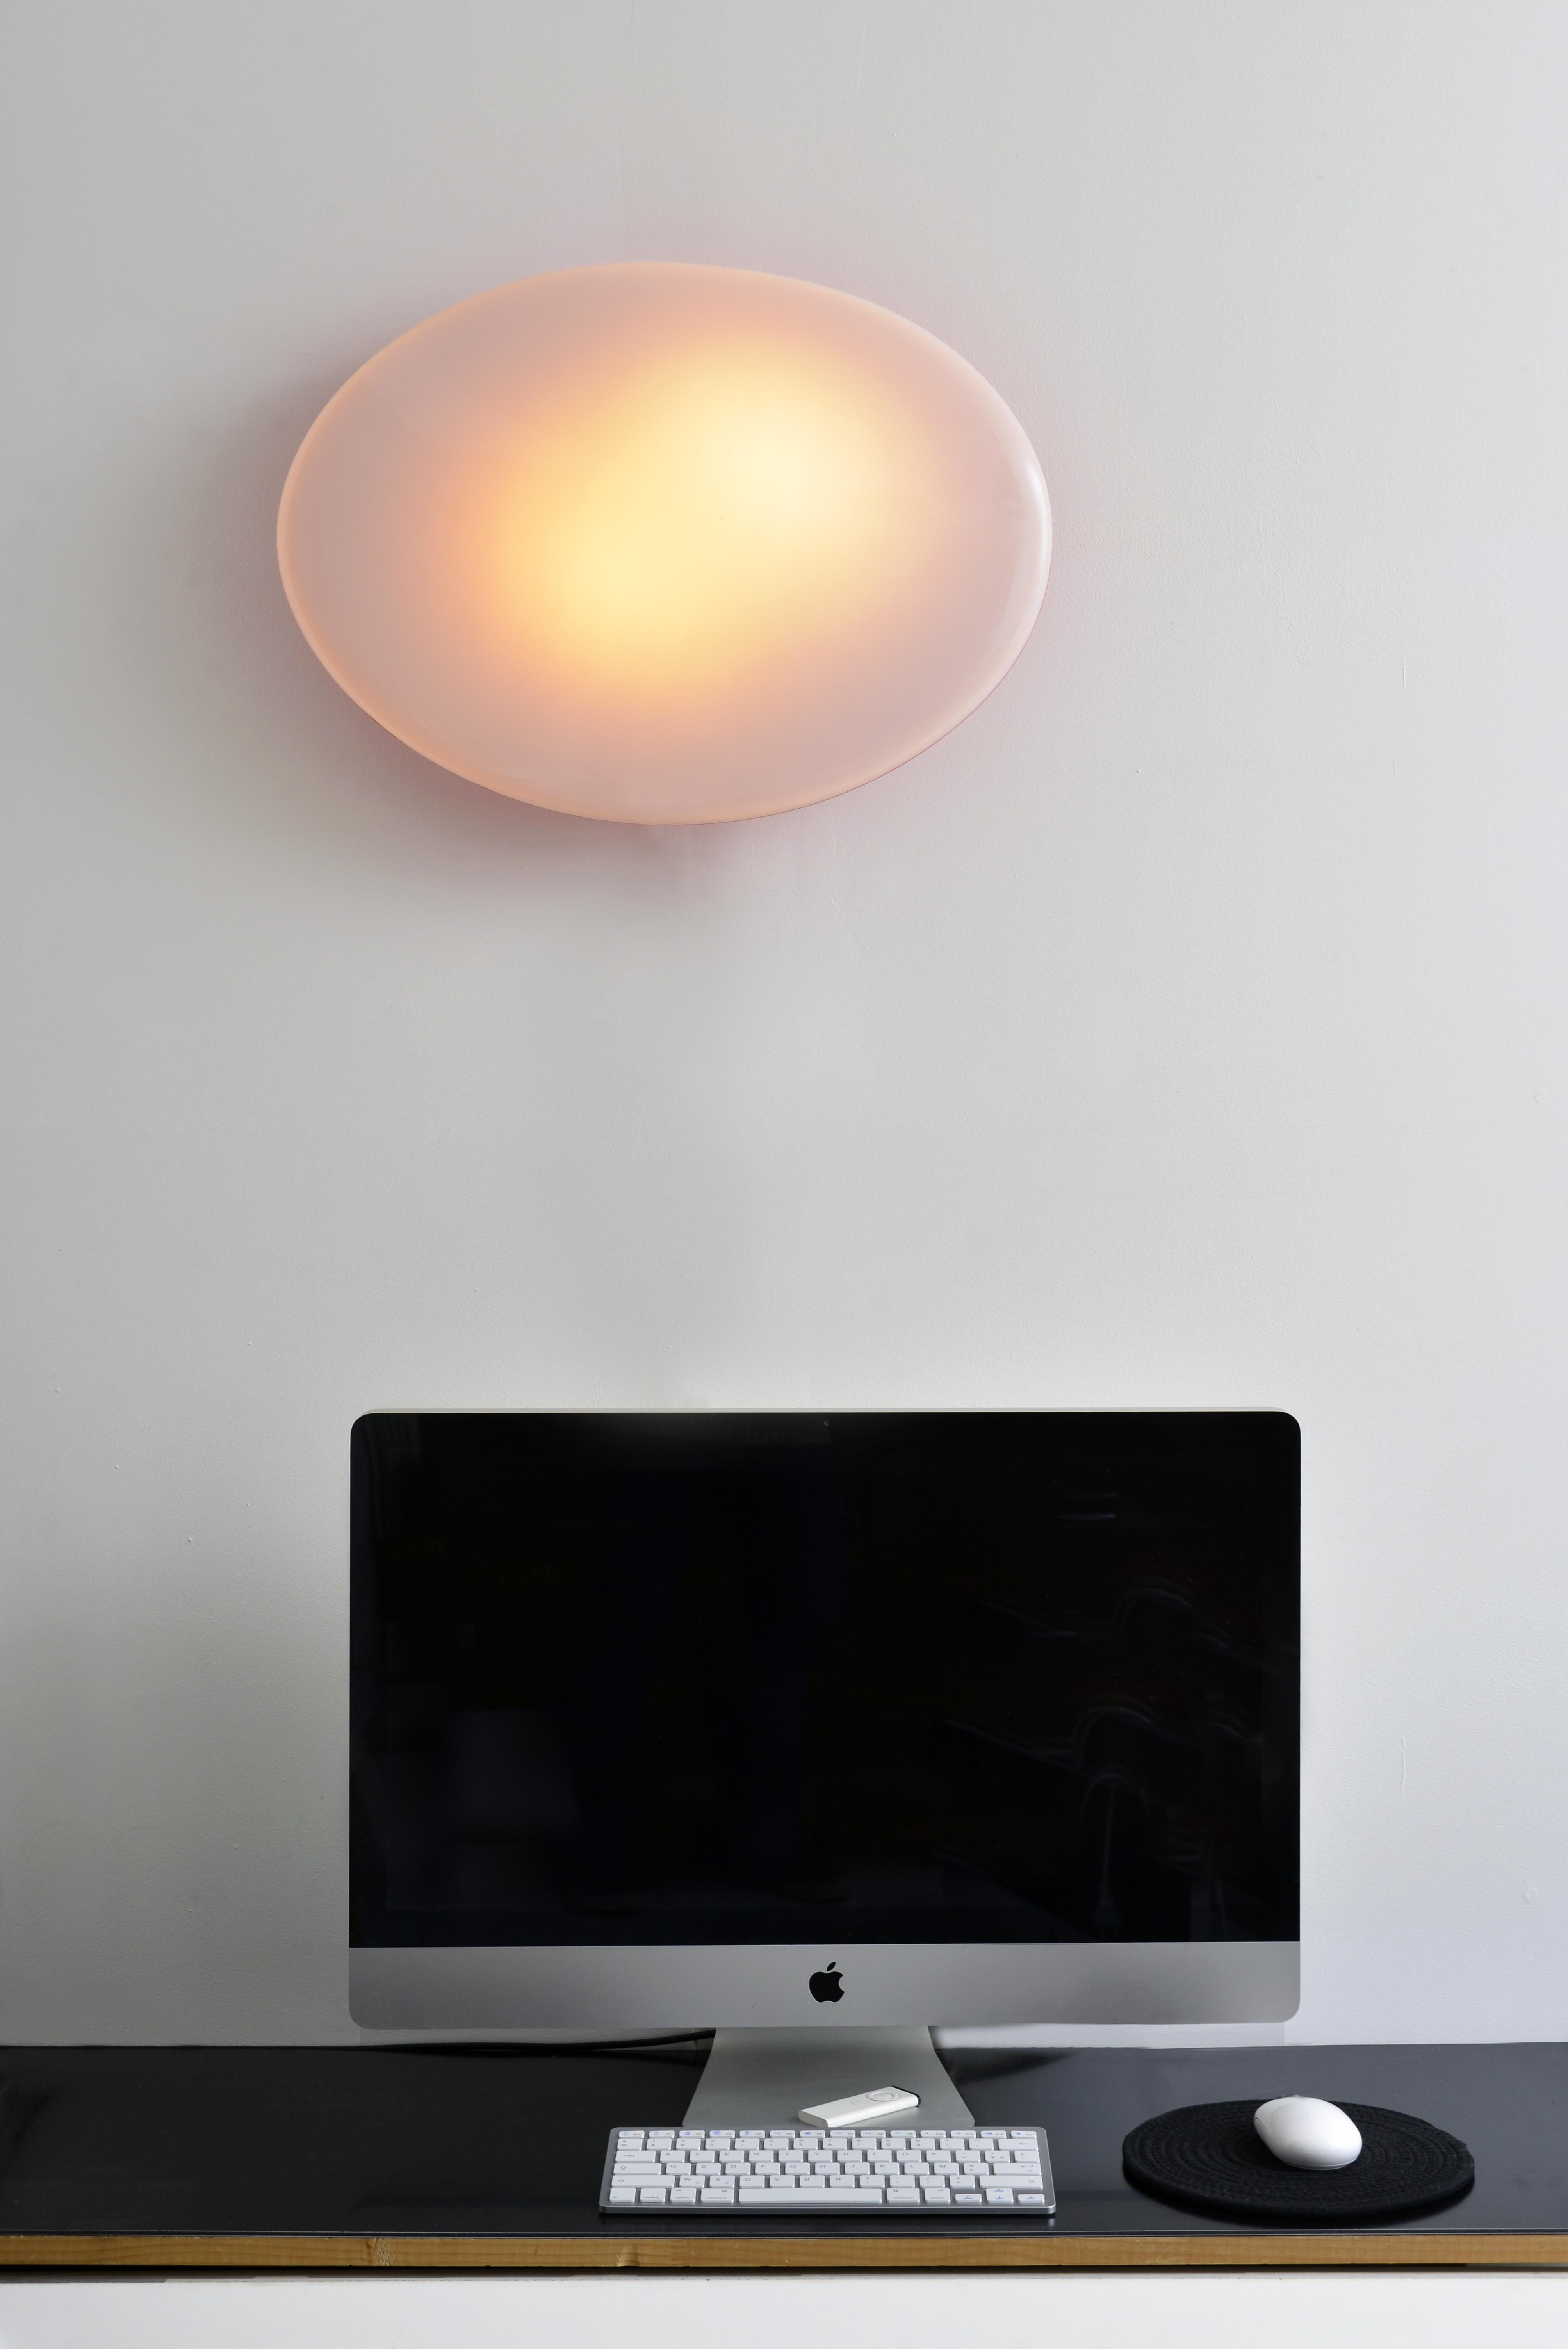 Wall lights, designed by Patrick Jouin in the early 2000s, published by Artémide for a hotel chain (not commercially available). Two-coloured thermoformed Plexiglas on a metal support, receiving two standard screw bulbs. Very soft and diffuse